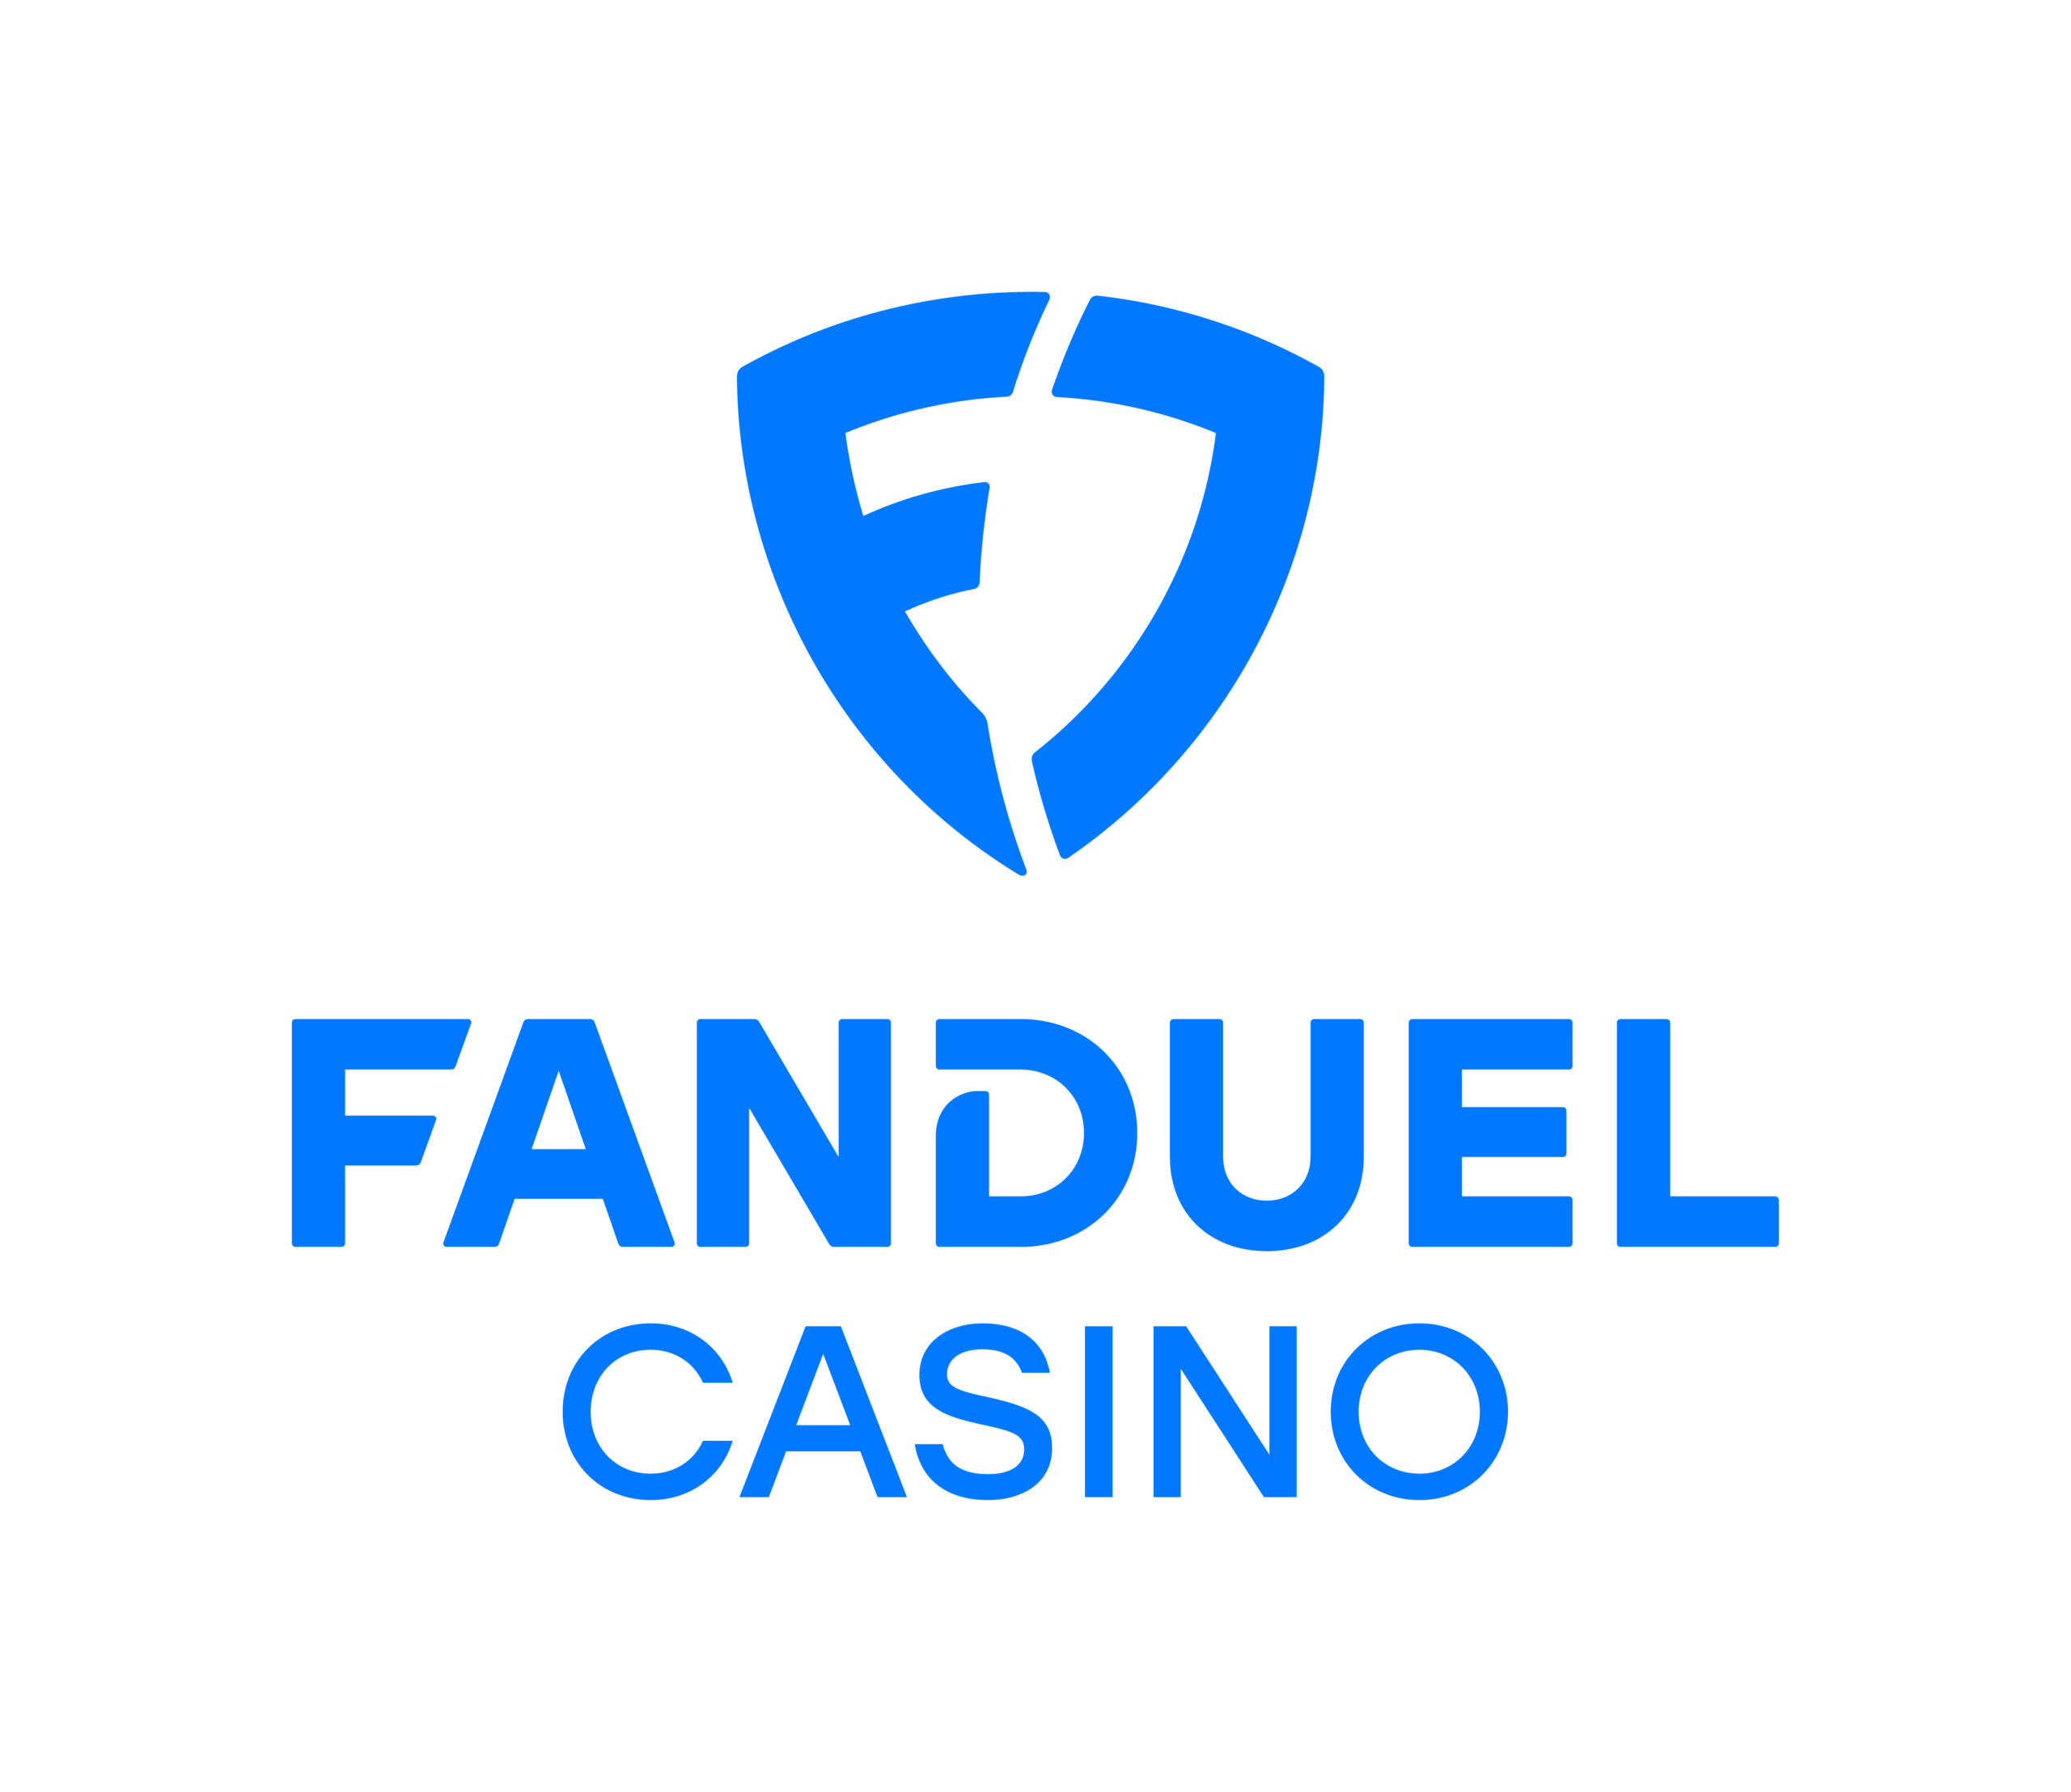 FanDuel Casino – Complete App Review with Online Promo and Bonus Offers